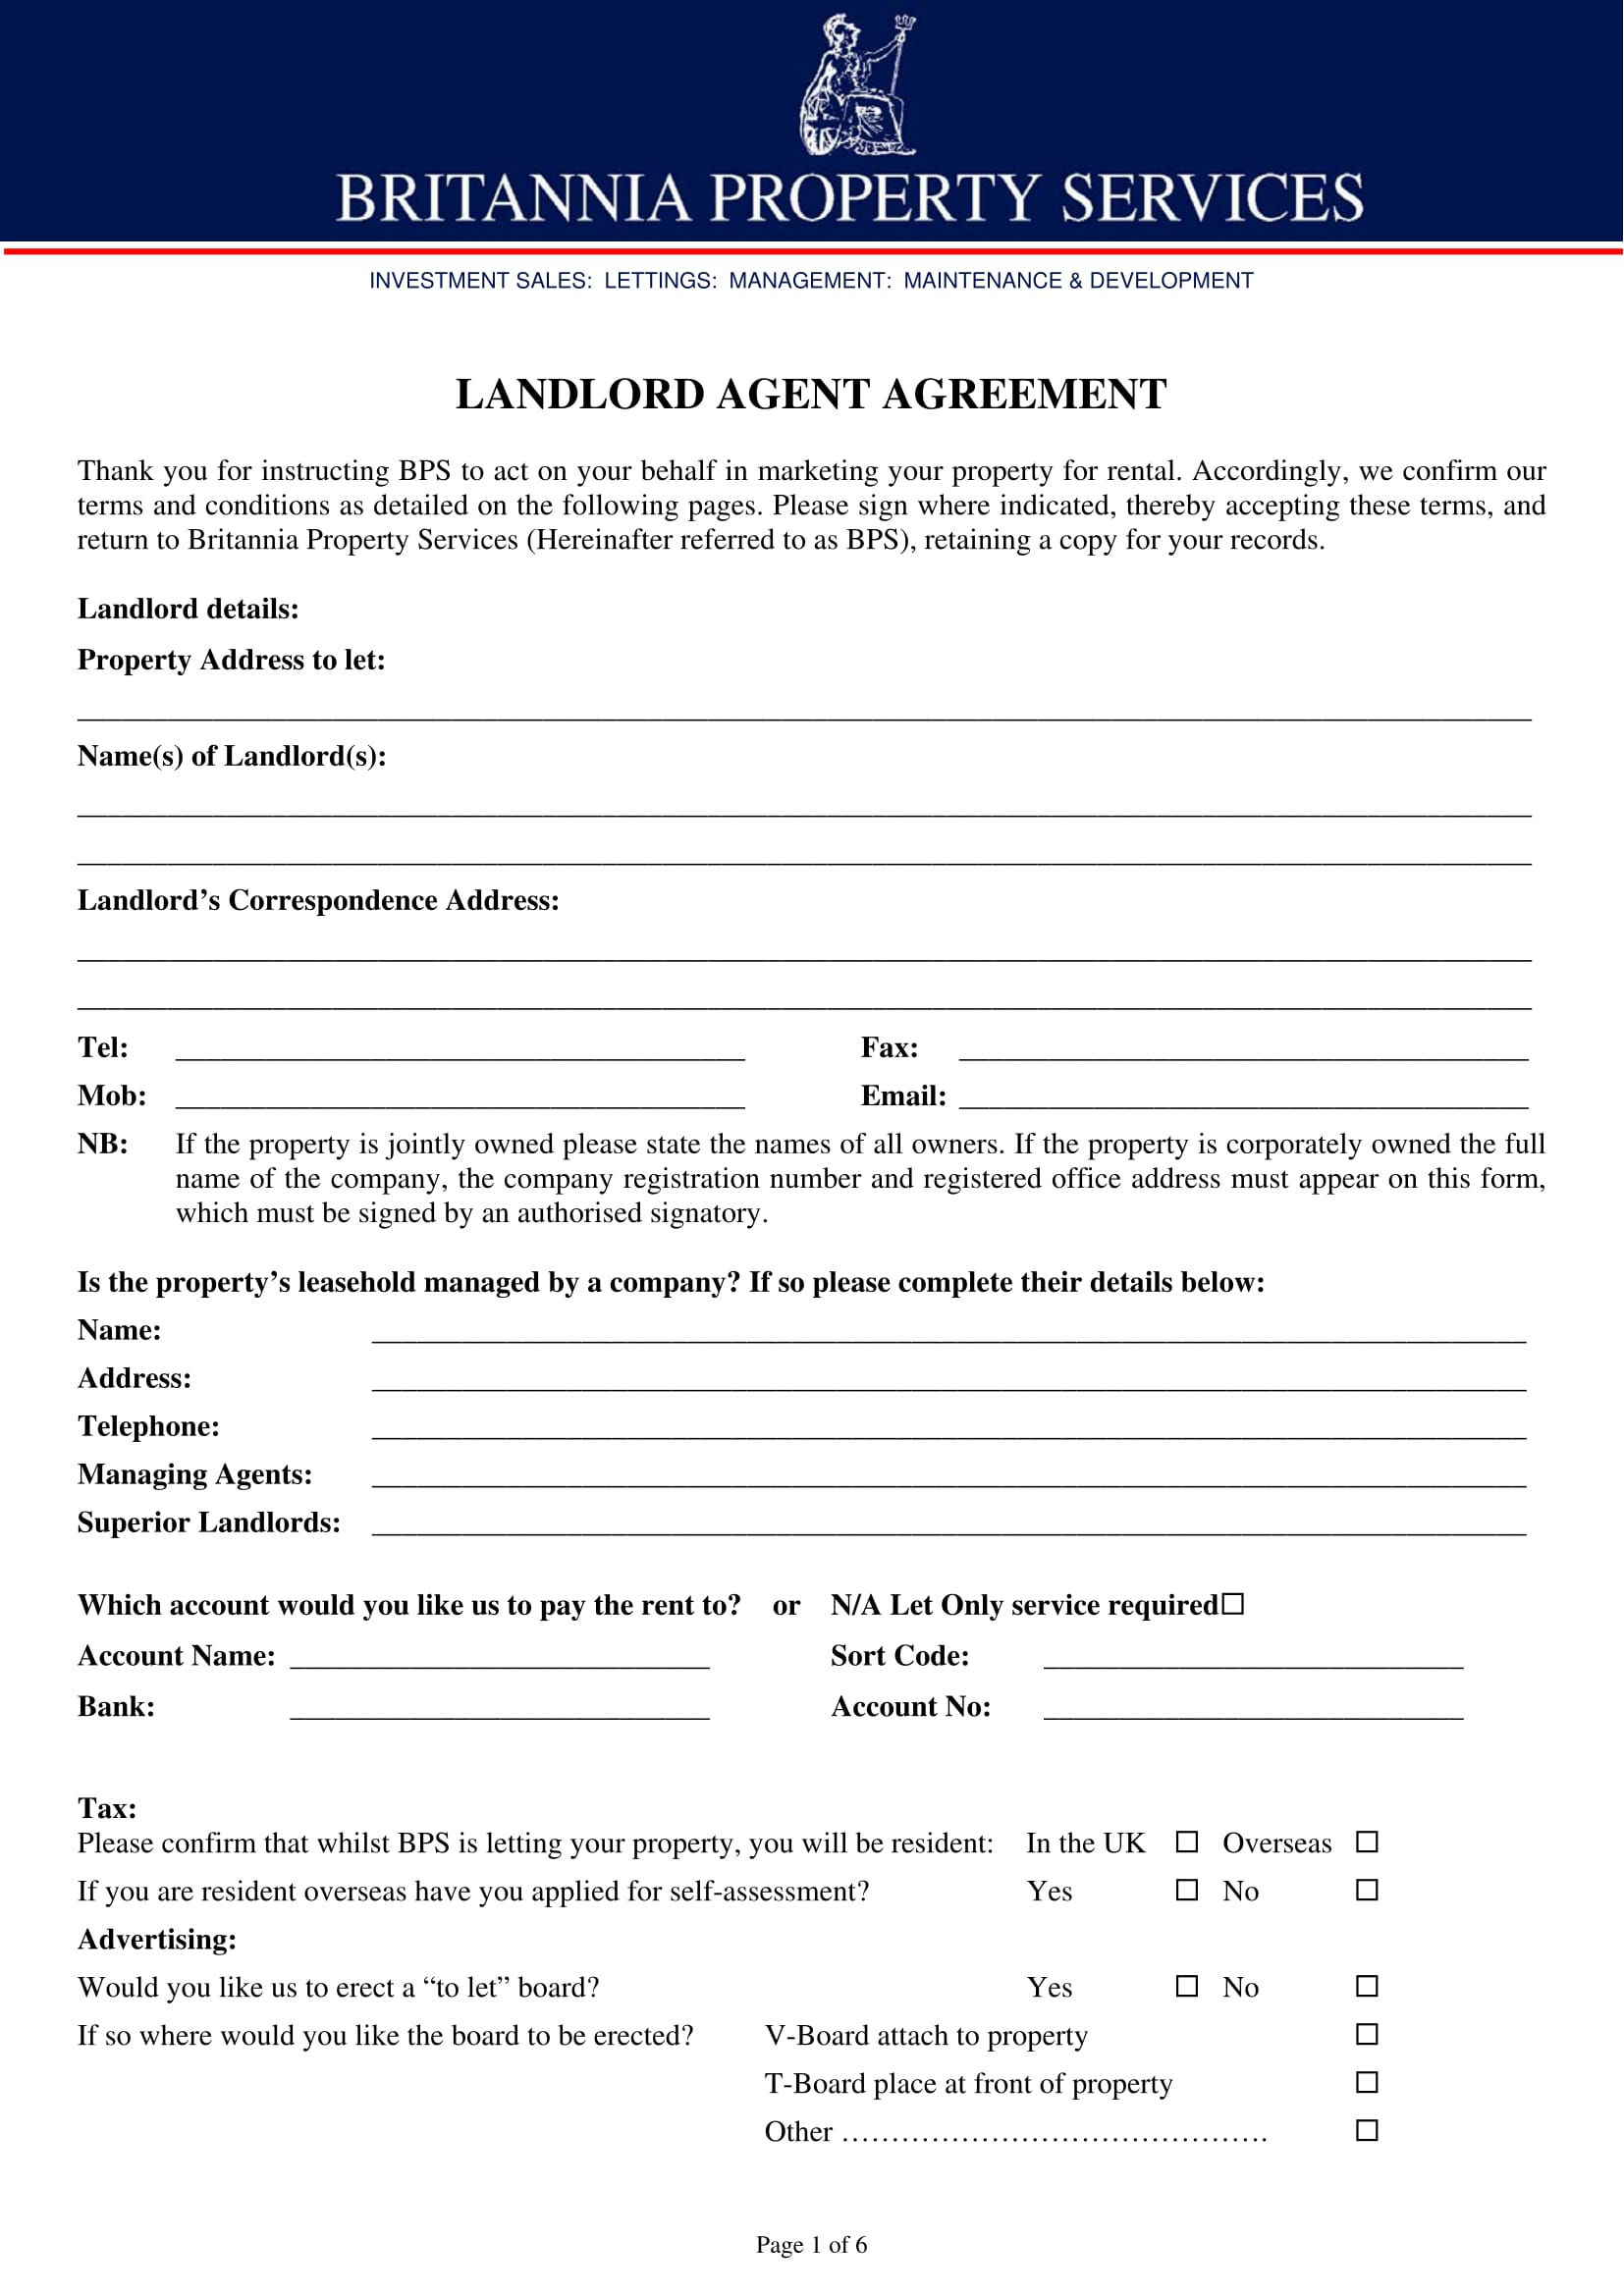 FREE 21+ Landlord Forms [ Agreements, Notice , Eviction , Deposit ] Within landlords property management agreement template